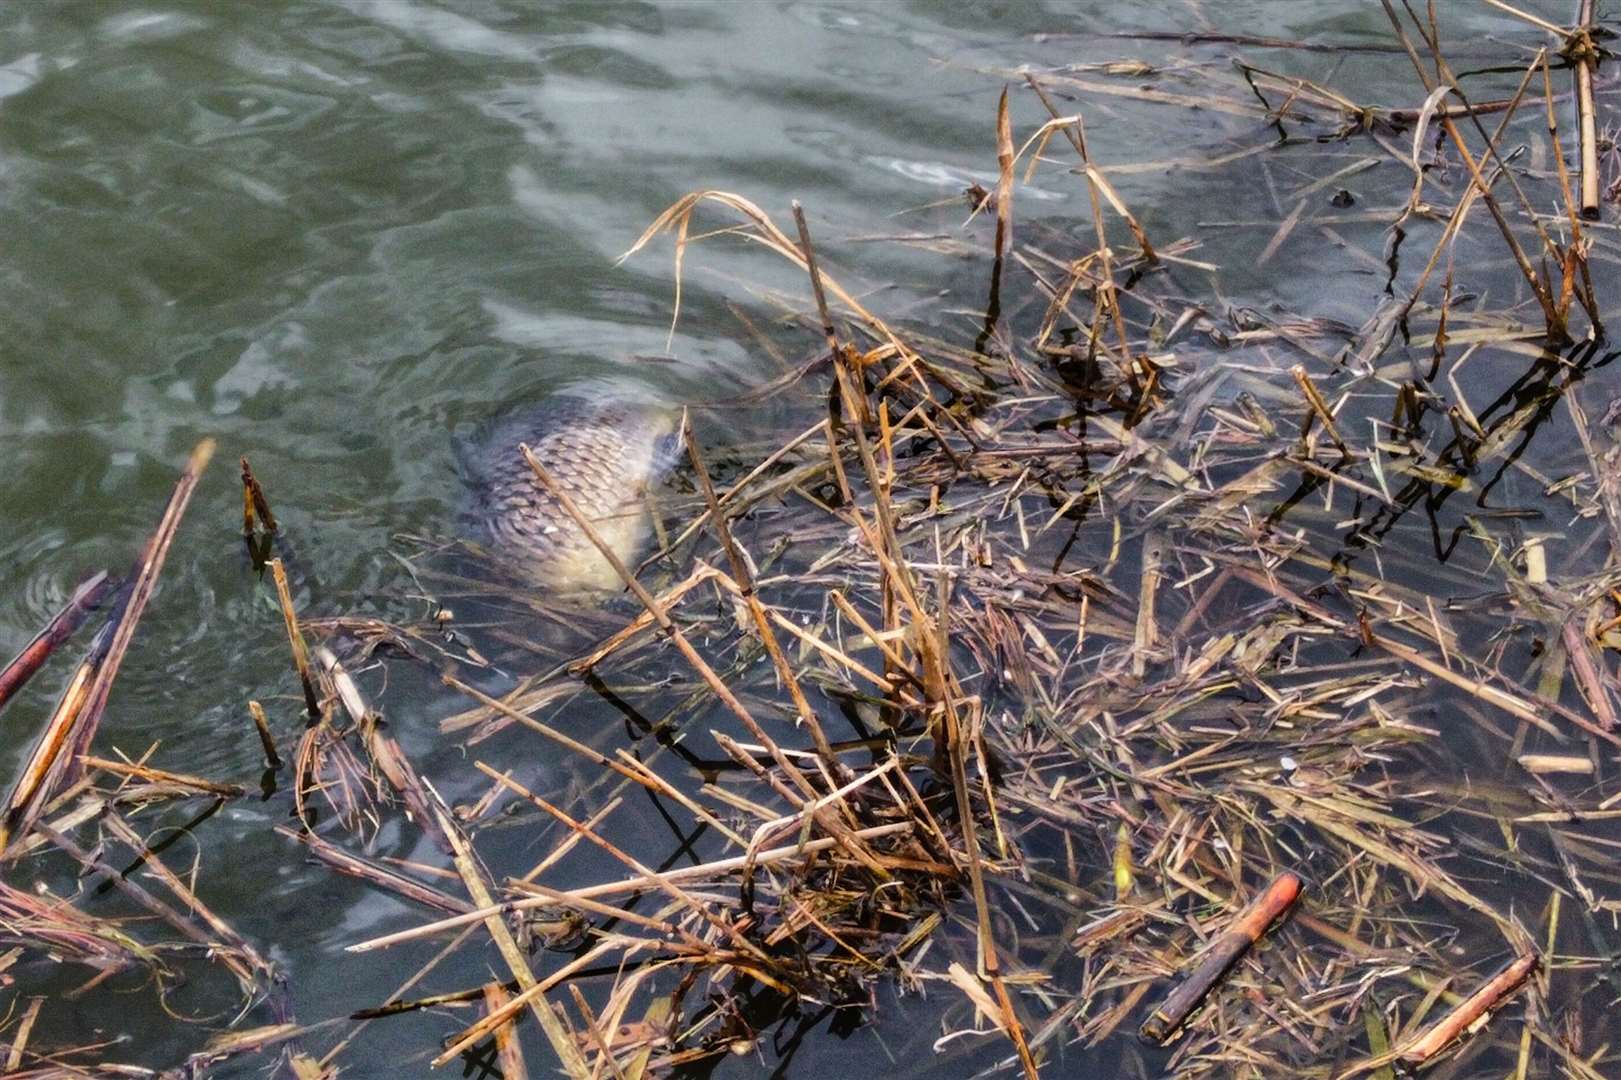 A dead fish in the lake at Gravesend. Image from Jason Arthur